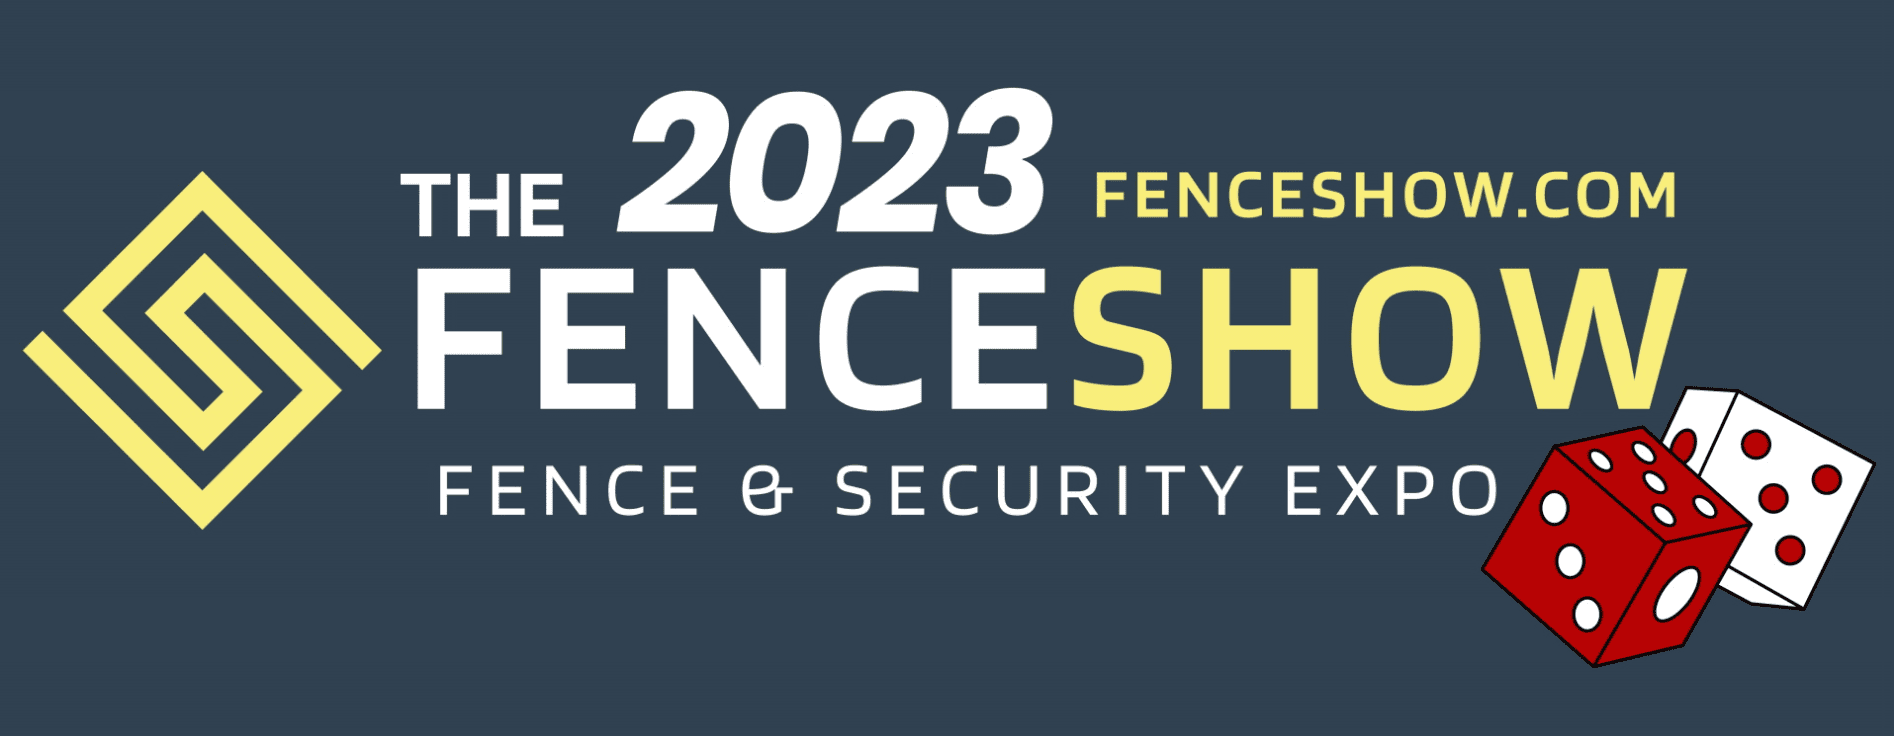 Fence Show & Security Expo